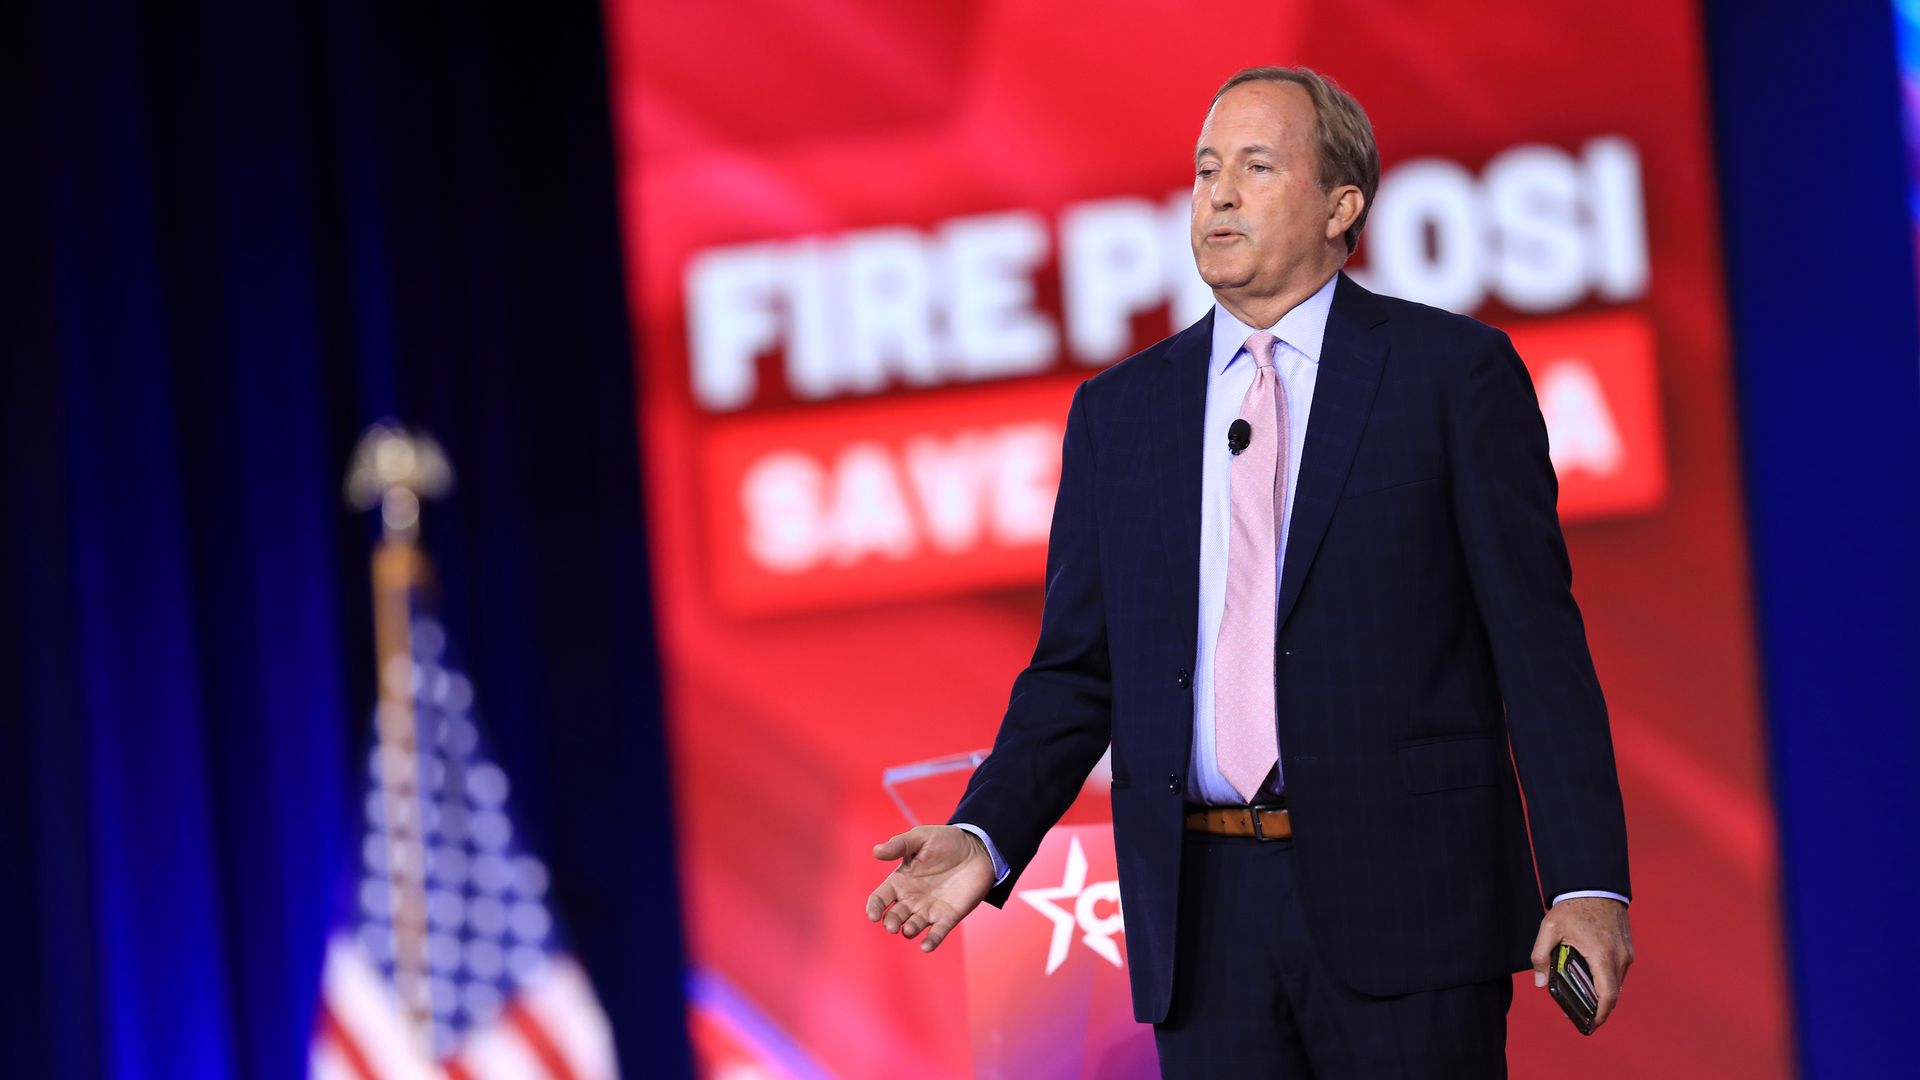 Ken Paxton, Texas attorney general, speaks during the Conservative Political Action Conference (CPAC) in Dallas, Texas, US, on Friday, Aug. 5, 2022.